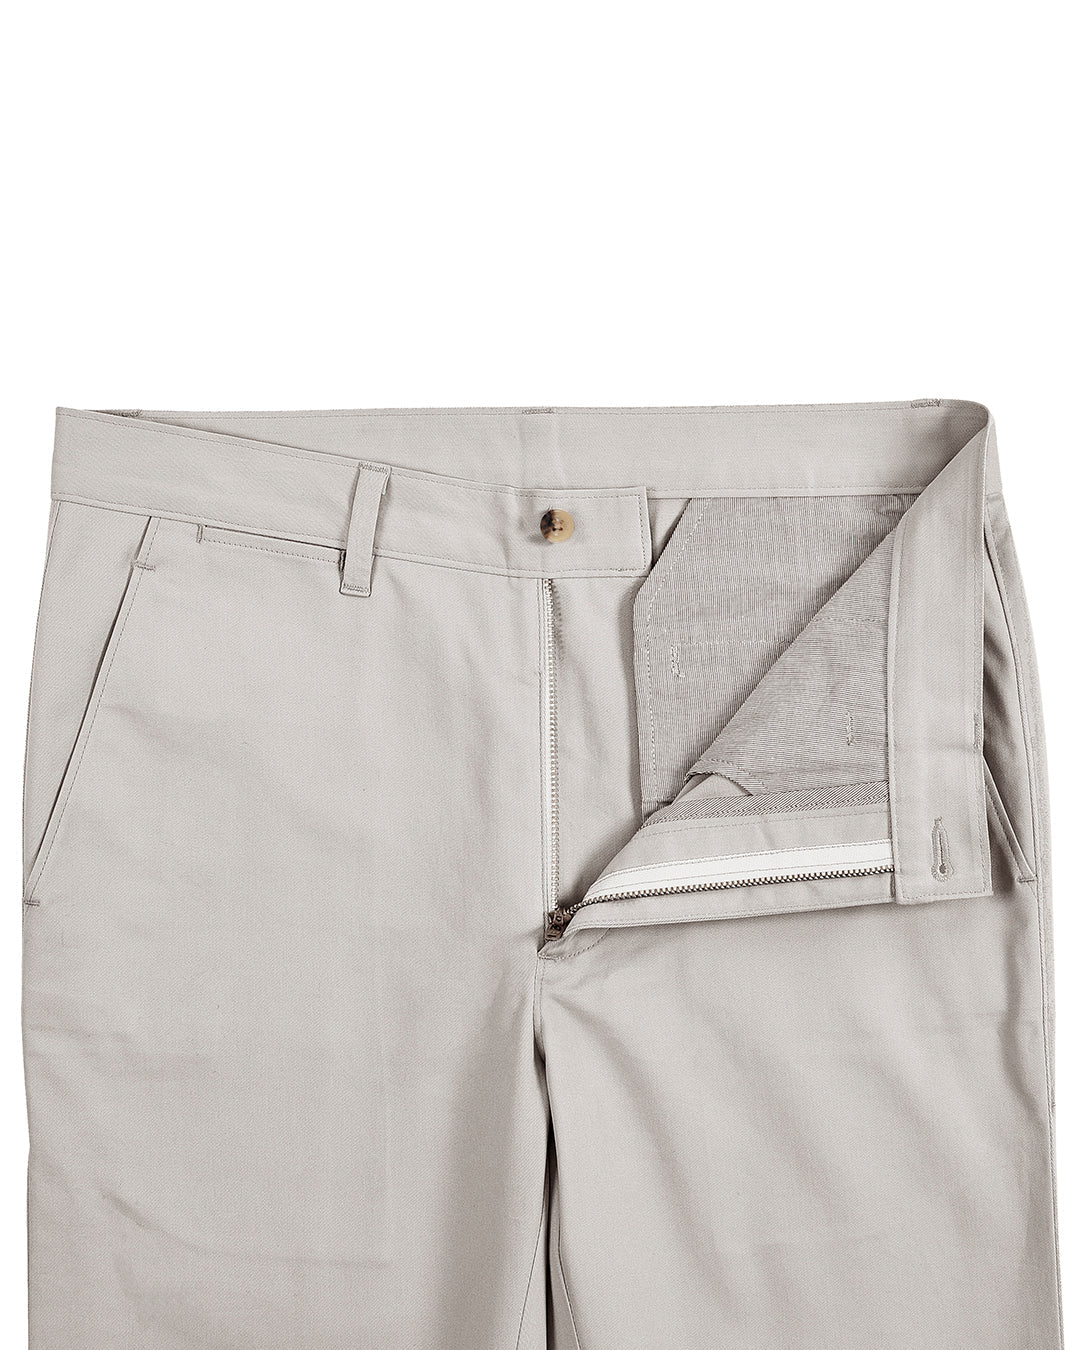 Open front view of custom Genoa Chino pants for men by Luxire in stone